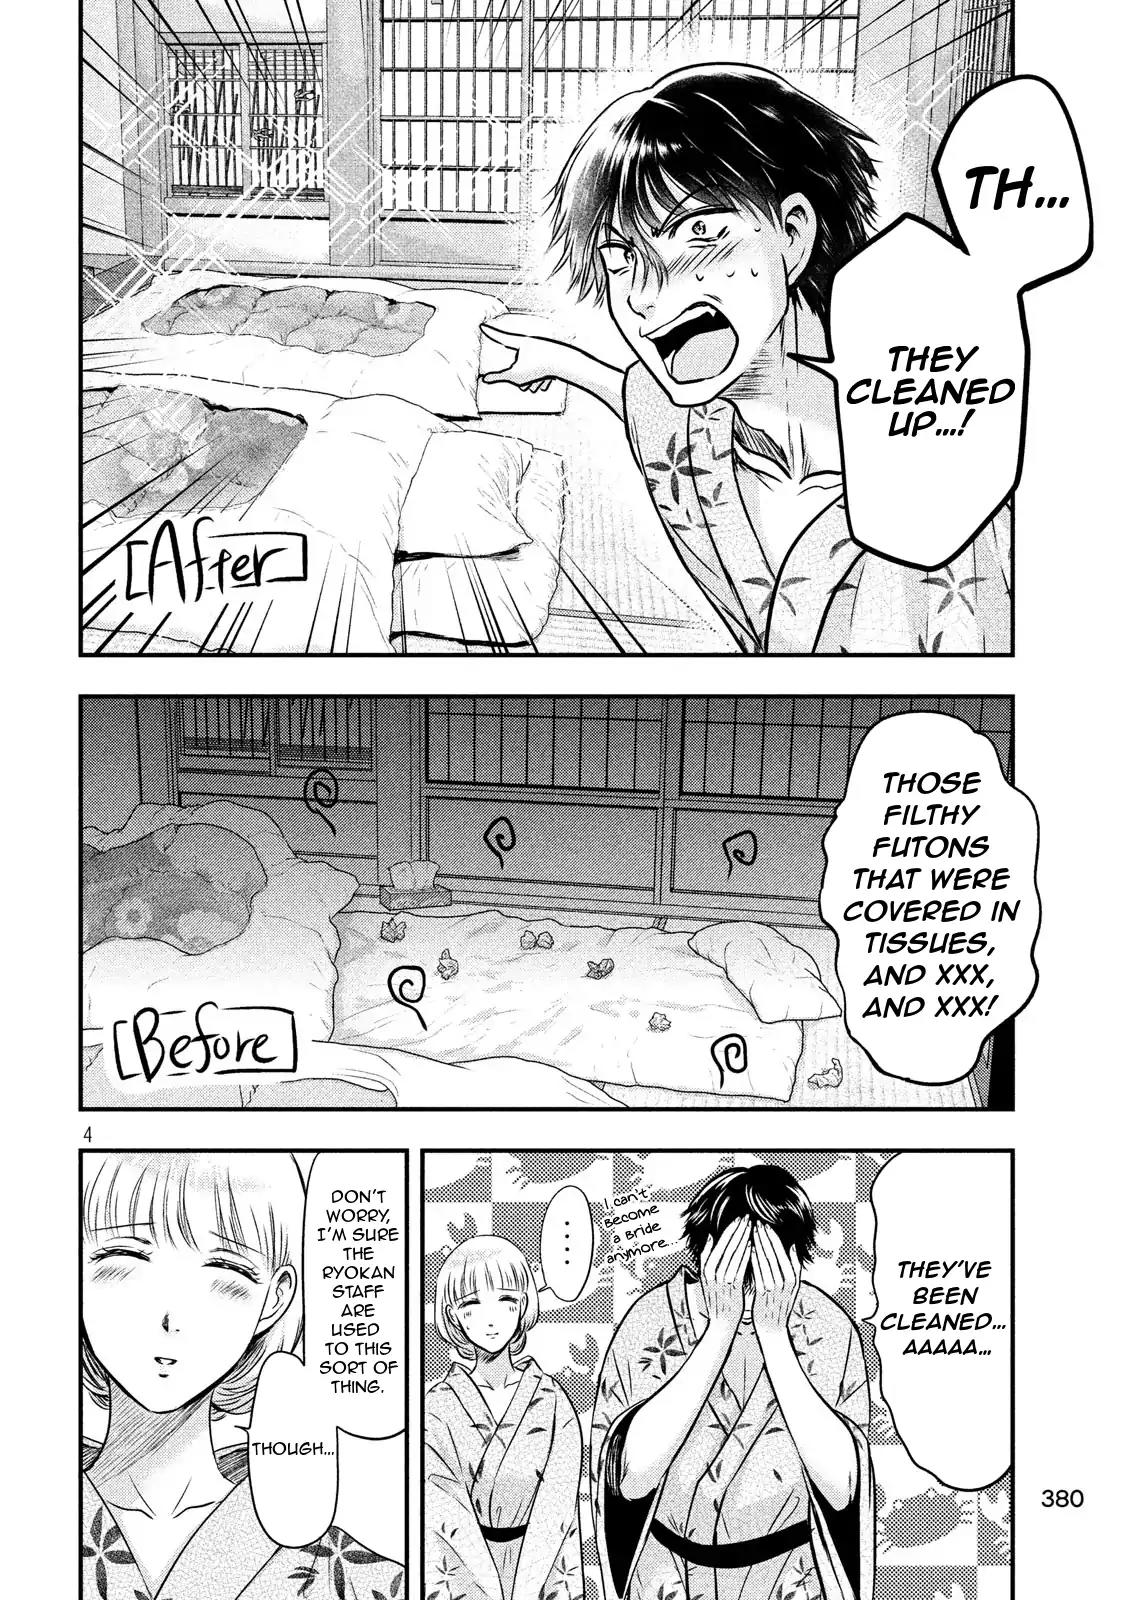 Eating Crab with a Yukionna Chapter 23: